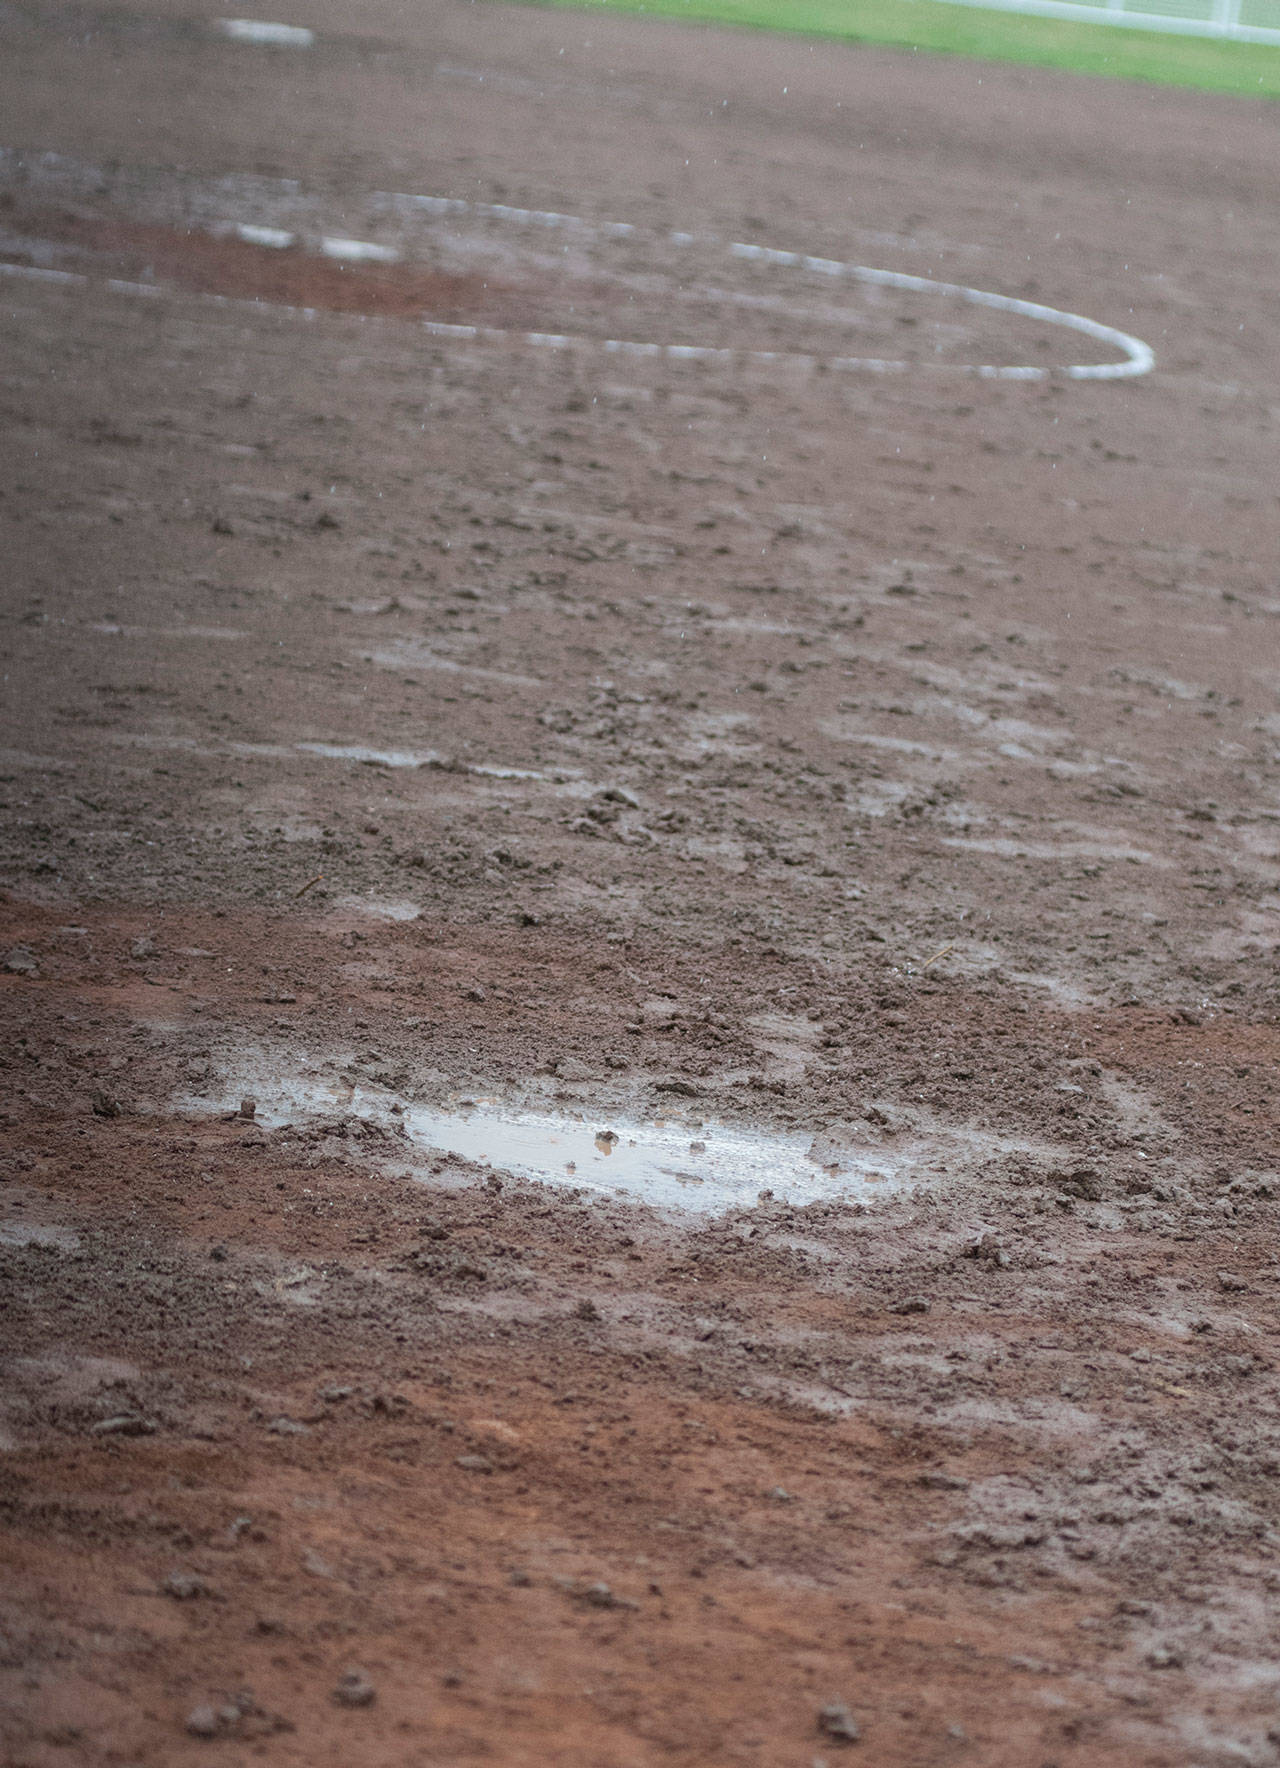 (BRENDAN CARL | THE DAILY WORLD) Record rainfall in March have turned baseball and softball fields into muddy, sloppy, slippery surfaces unfit for play. Traditionally, there is less rain in April and fields like this will need the dry weather to drain the water to make them playable.